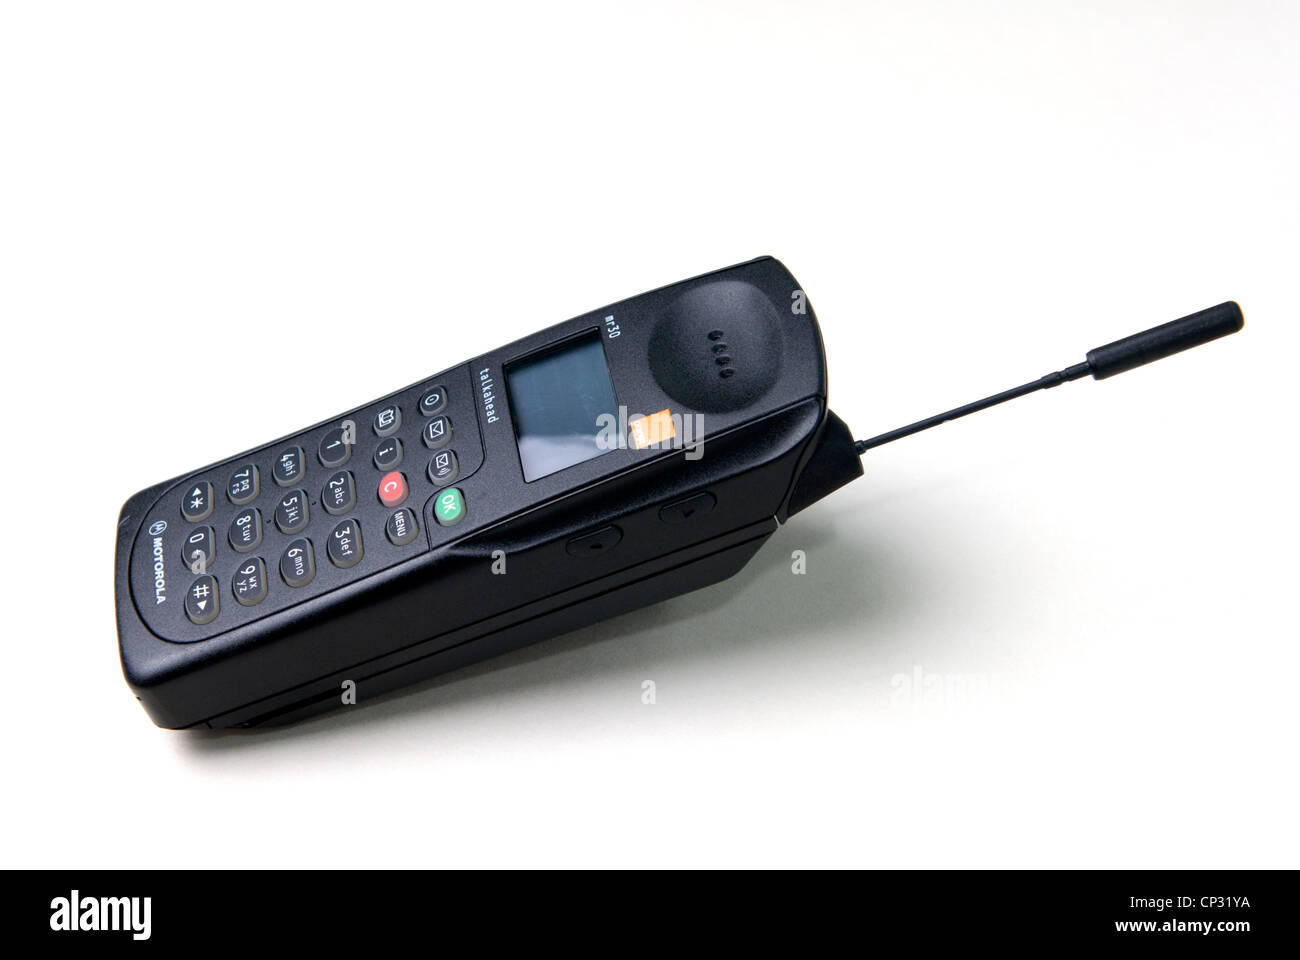 generic image of a Motorola mr30 mobile phone launched in 1994 with the  advertising tag of "small neat lightweight phone" ! Stock Photo - Alamy